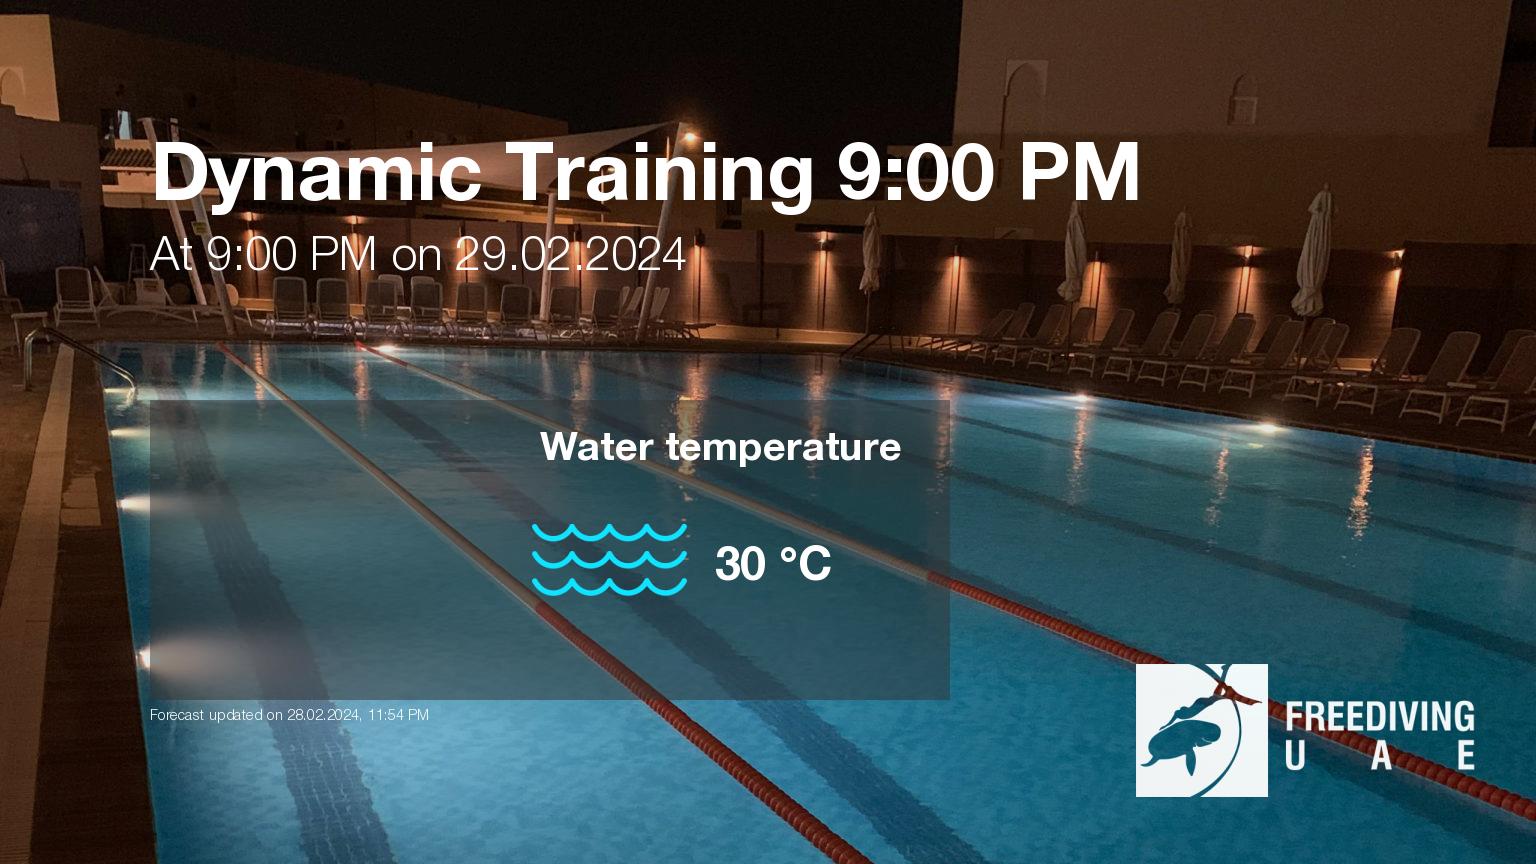 Expected weather during Dynamic Training 9:00 PM on Thu, Feb 29, at 9:00 PM